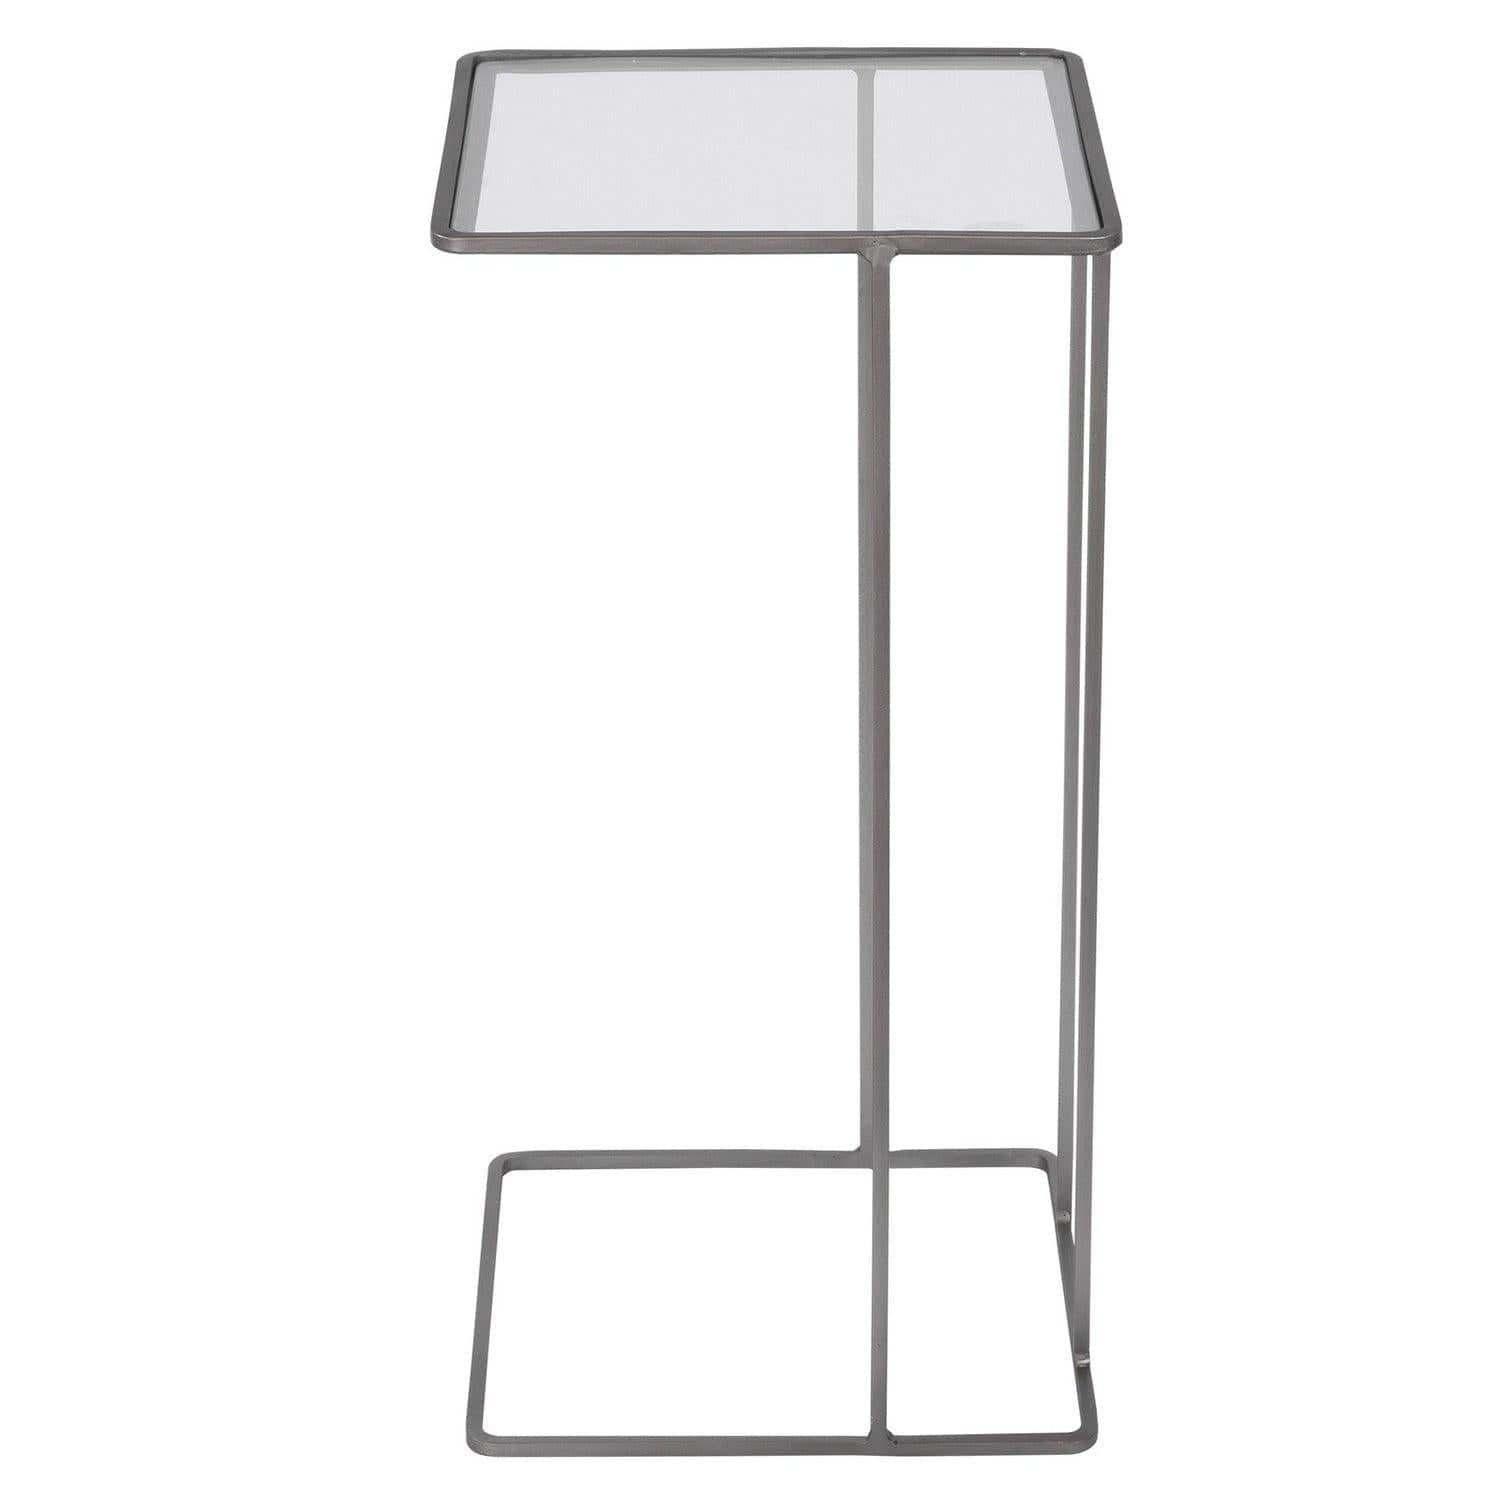 The Uttermost - Cadmus Accent Table - 25122 | Montreal Lighting & Hardware